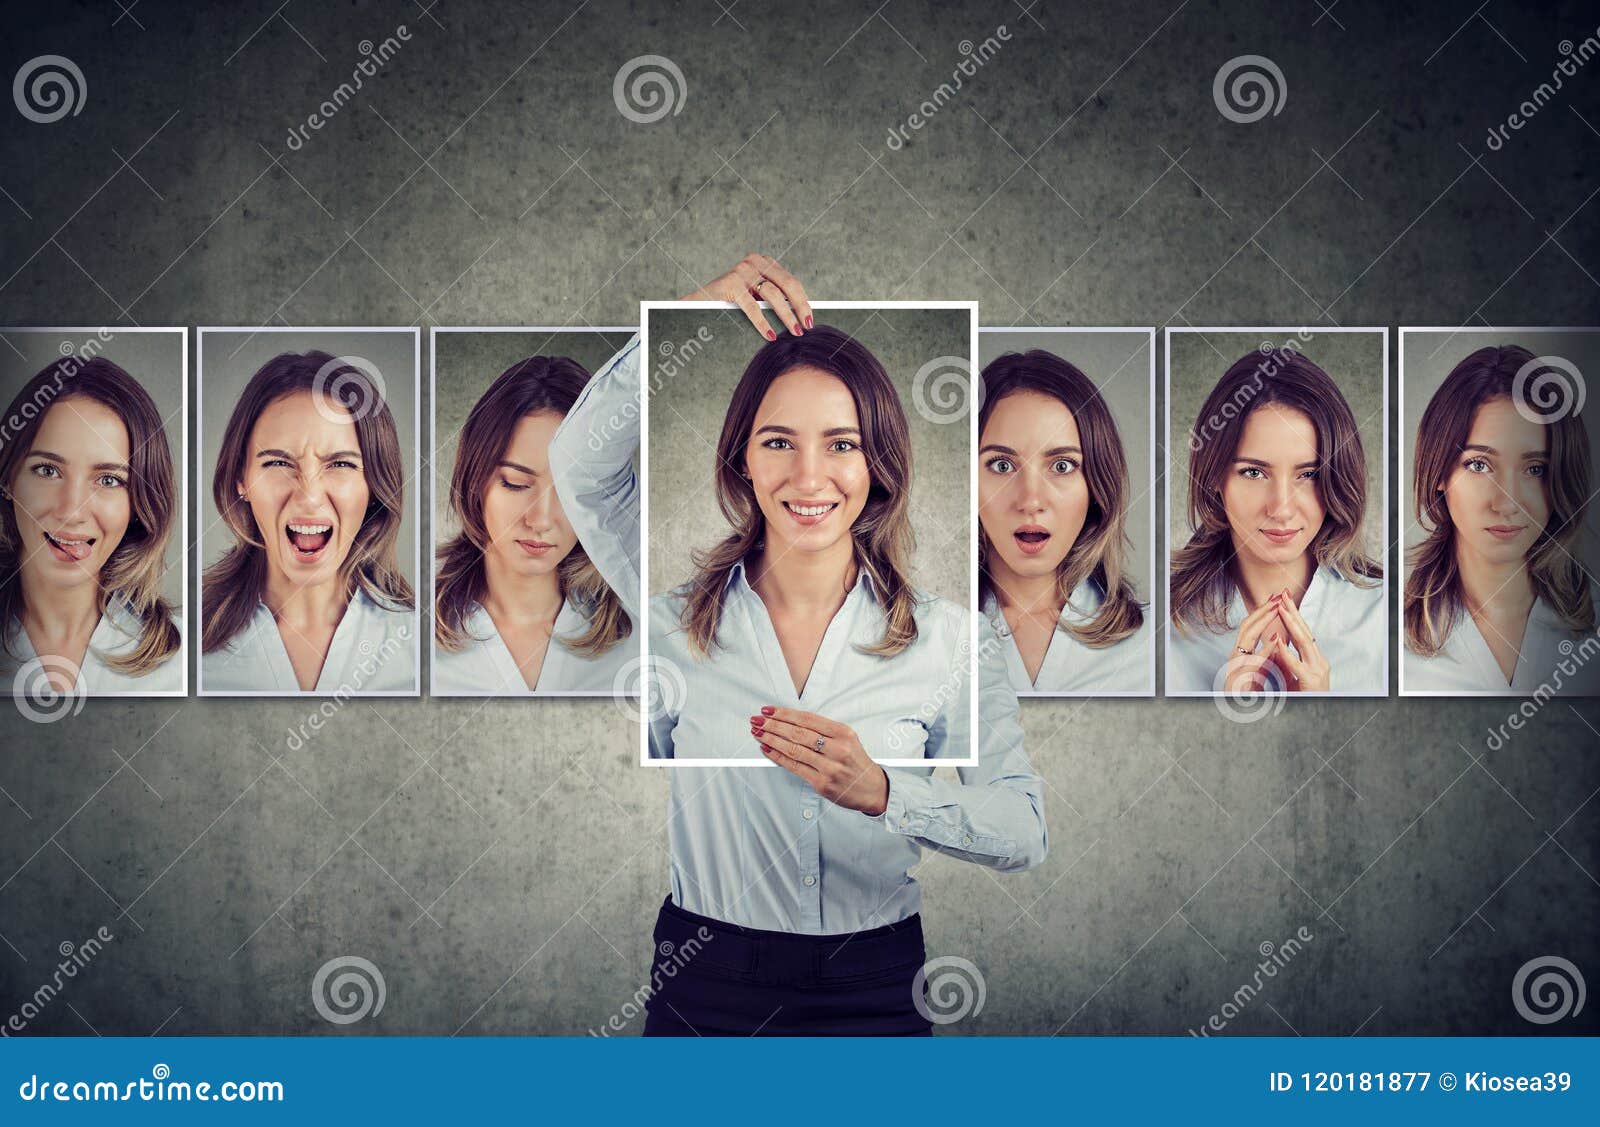 young woman expressing different emotions